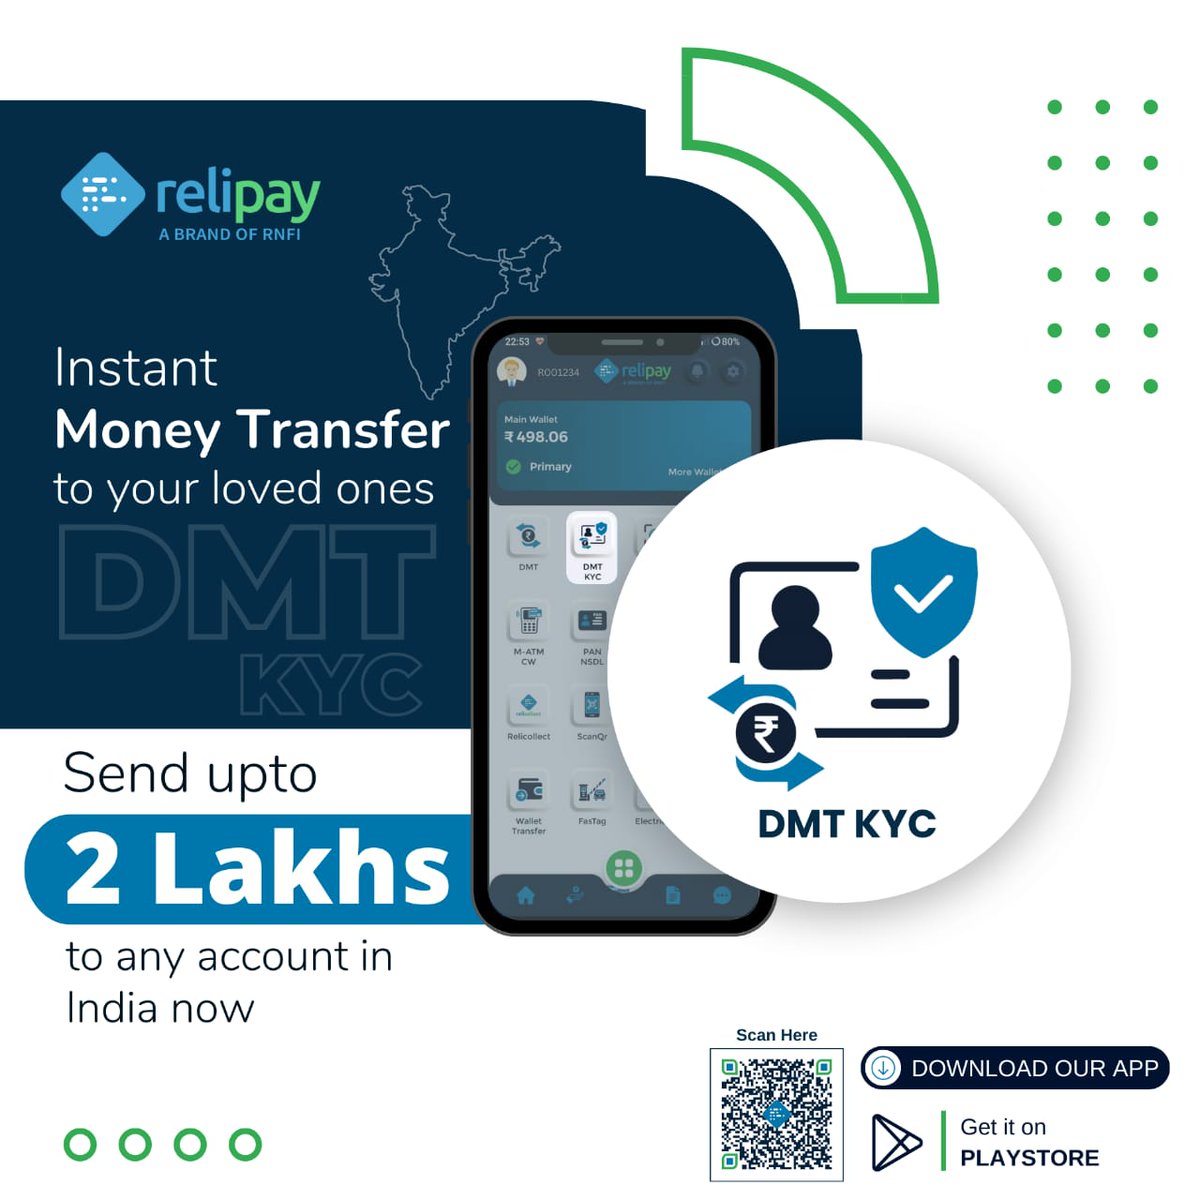 Now transfer funds up to 𝟐 𝐥𝐚𝐤𝐡𝐬 in 𝐫𝐞𝐚𝐥-𝐭𝐢𝐦𝐞 throughout India using 𝐑𝐞𝐥𝐢𝐩𝐚𝐲’𝐬 safe and reliable 𝐃𝐌𝐓 service. 
.
.
 #DMT #MoneyTransfer  #DomesticMoneyTransfer #ServingIndia #EarnMore #DigitalDukaan #DigitalIndia #RNFI #rnfiservicesofficial #rnfiservices